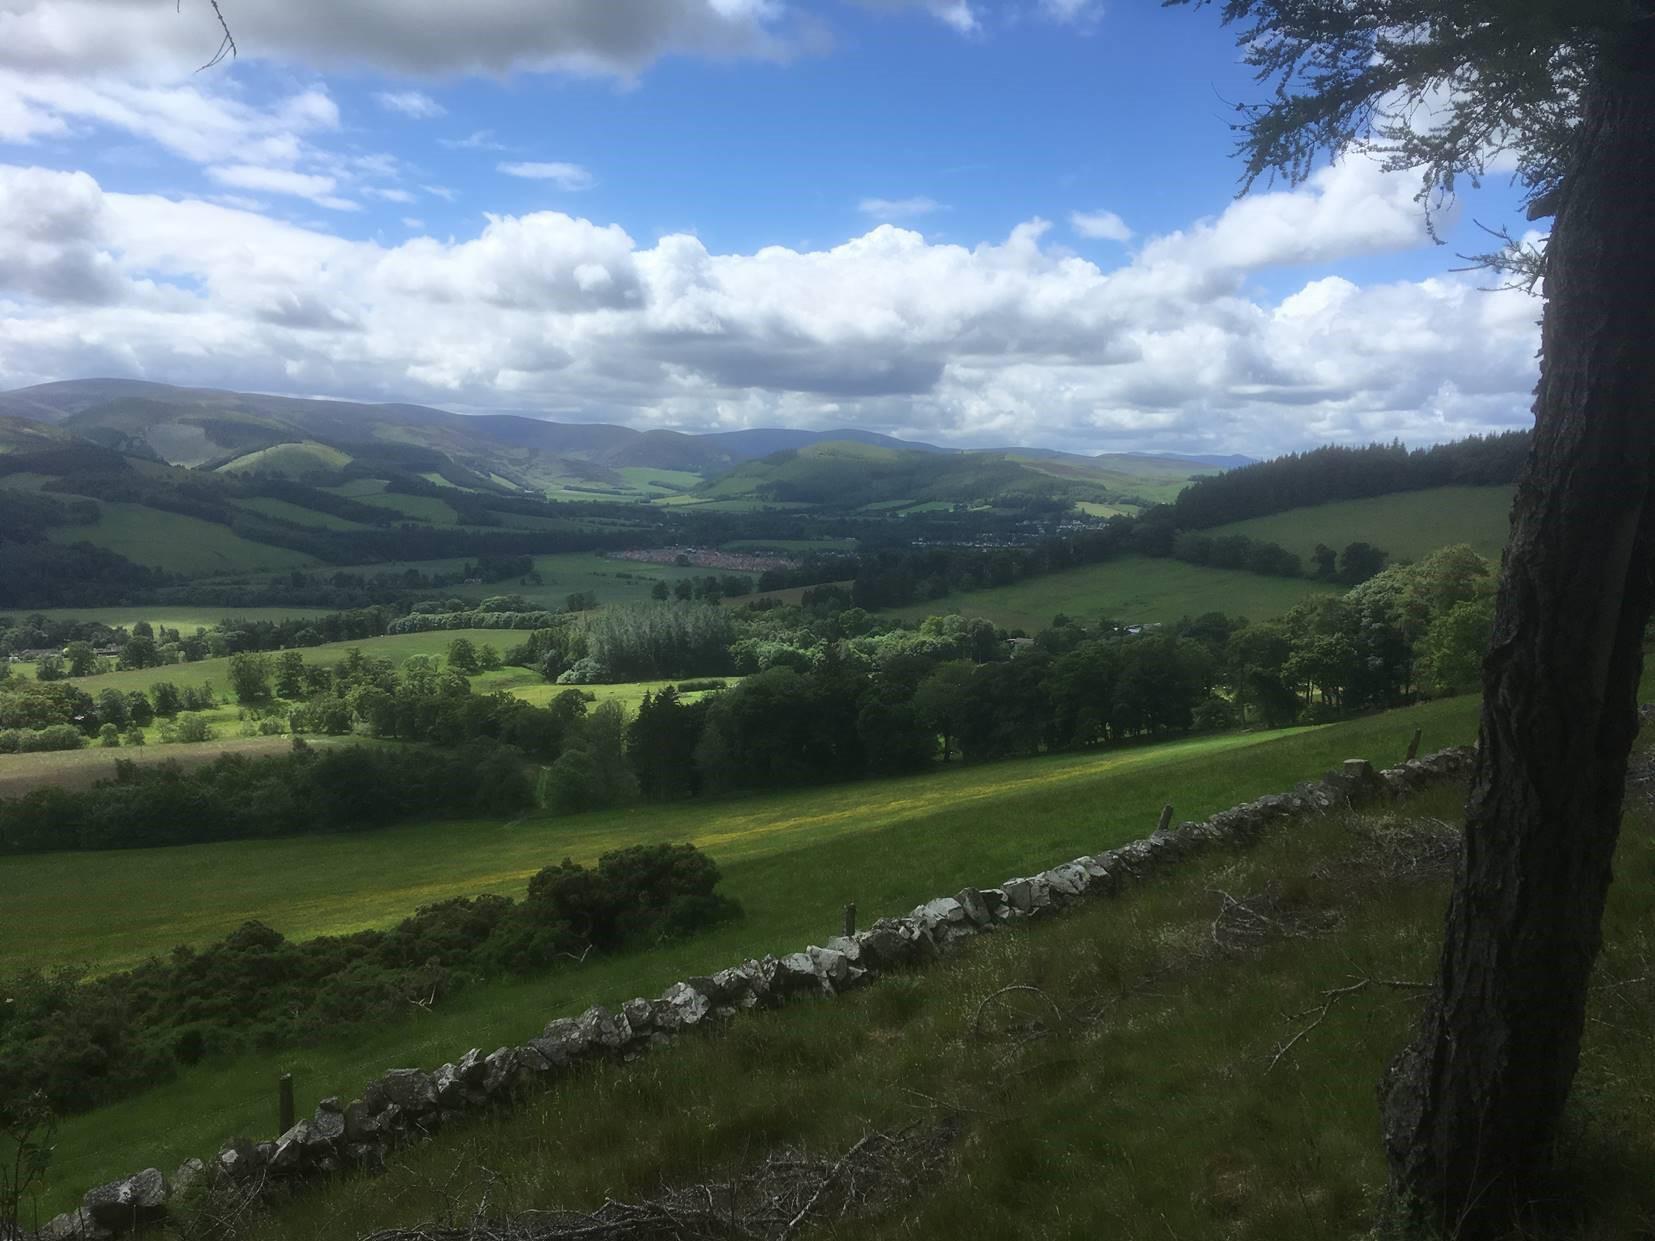 Gus Tweedale, surveyor from our Glasgow Team, was checking the quality of our data for national cycle revision in Tweeddale Ettrick and Lauderdale when he came across this view.